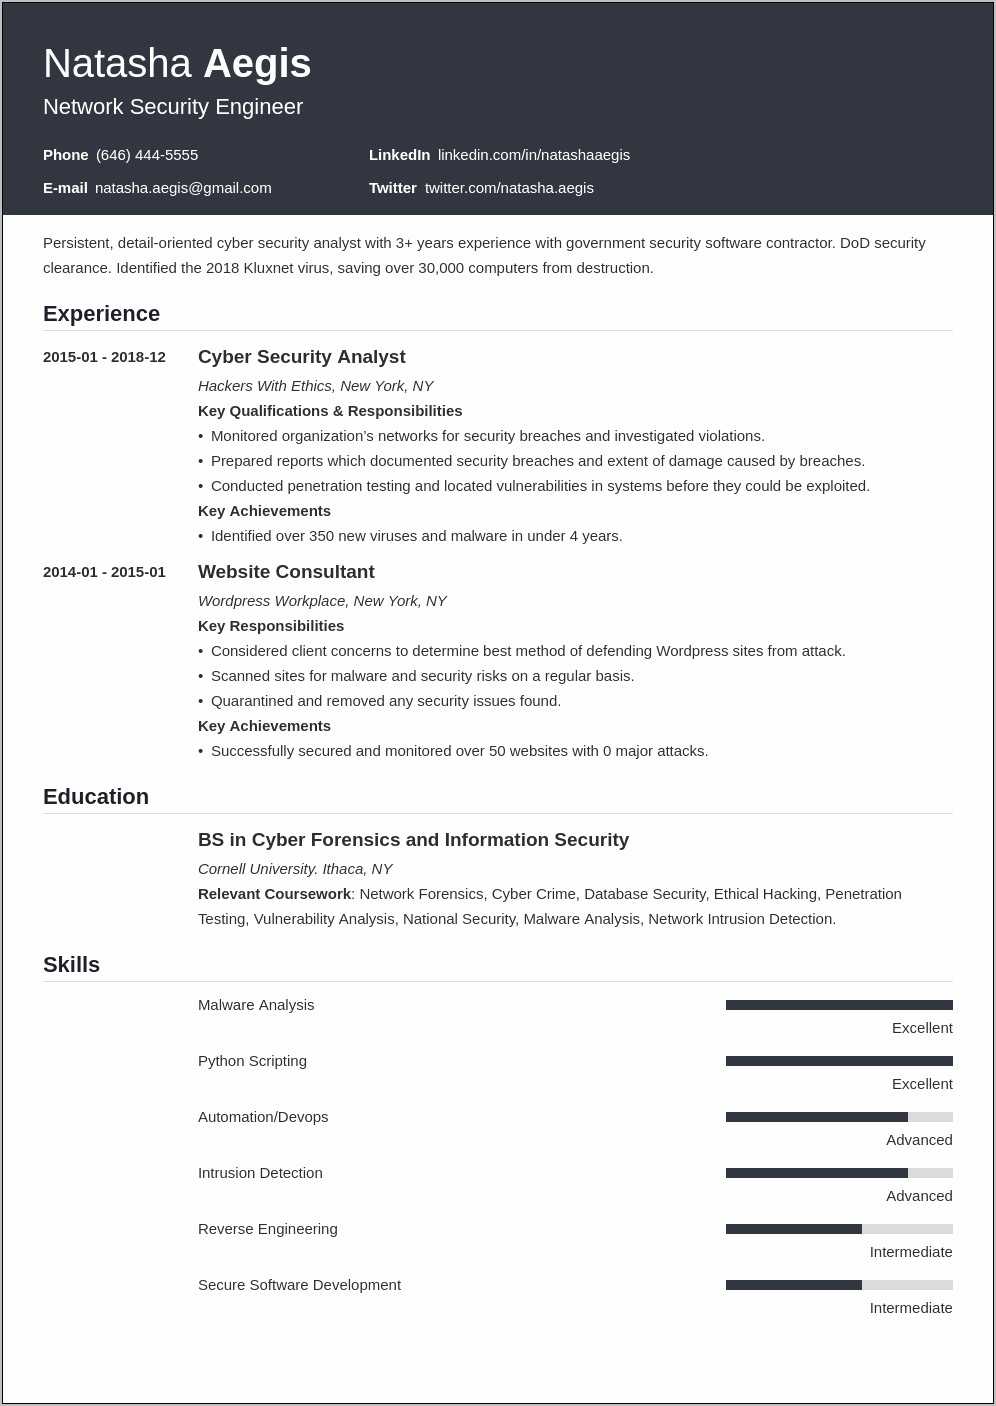 Resume Objective For Cyber Security Jobs